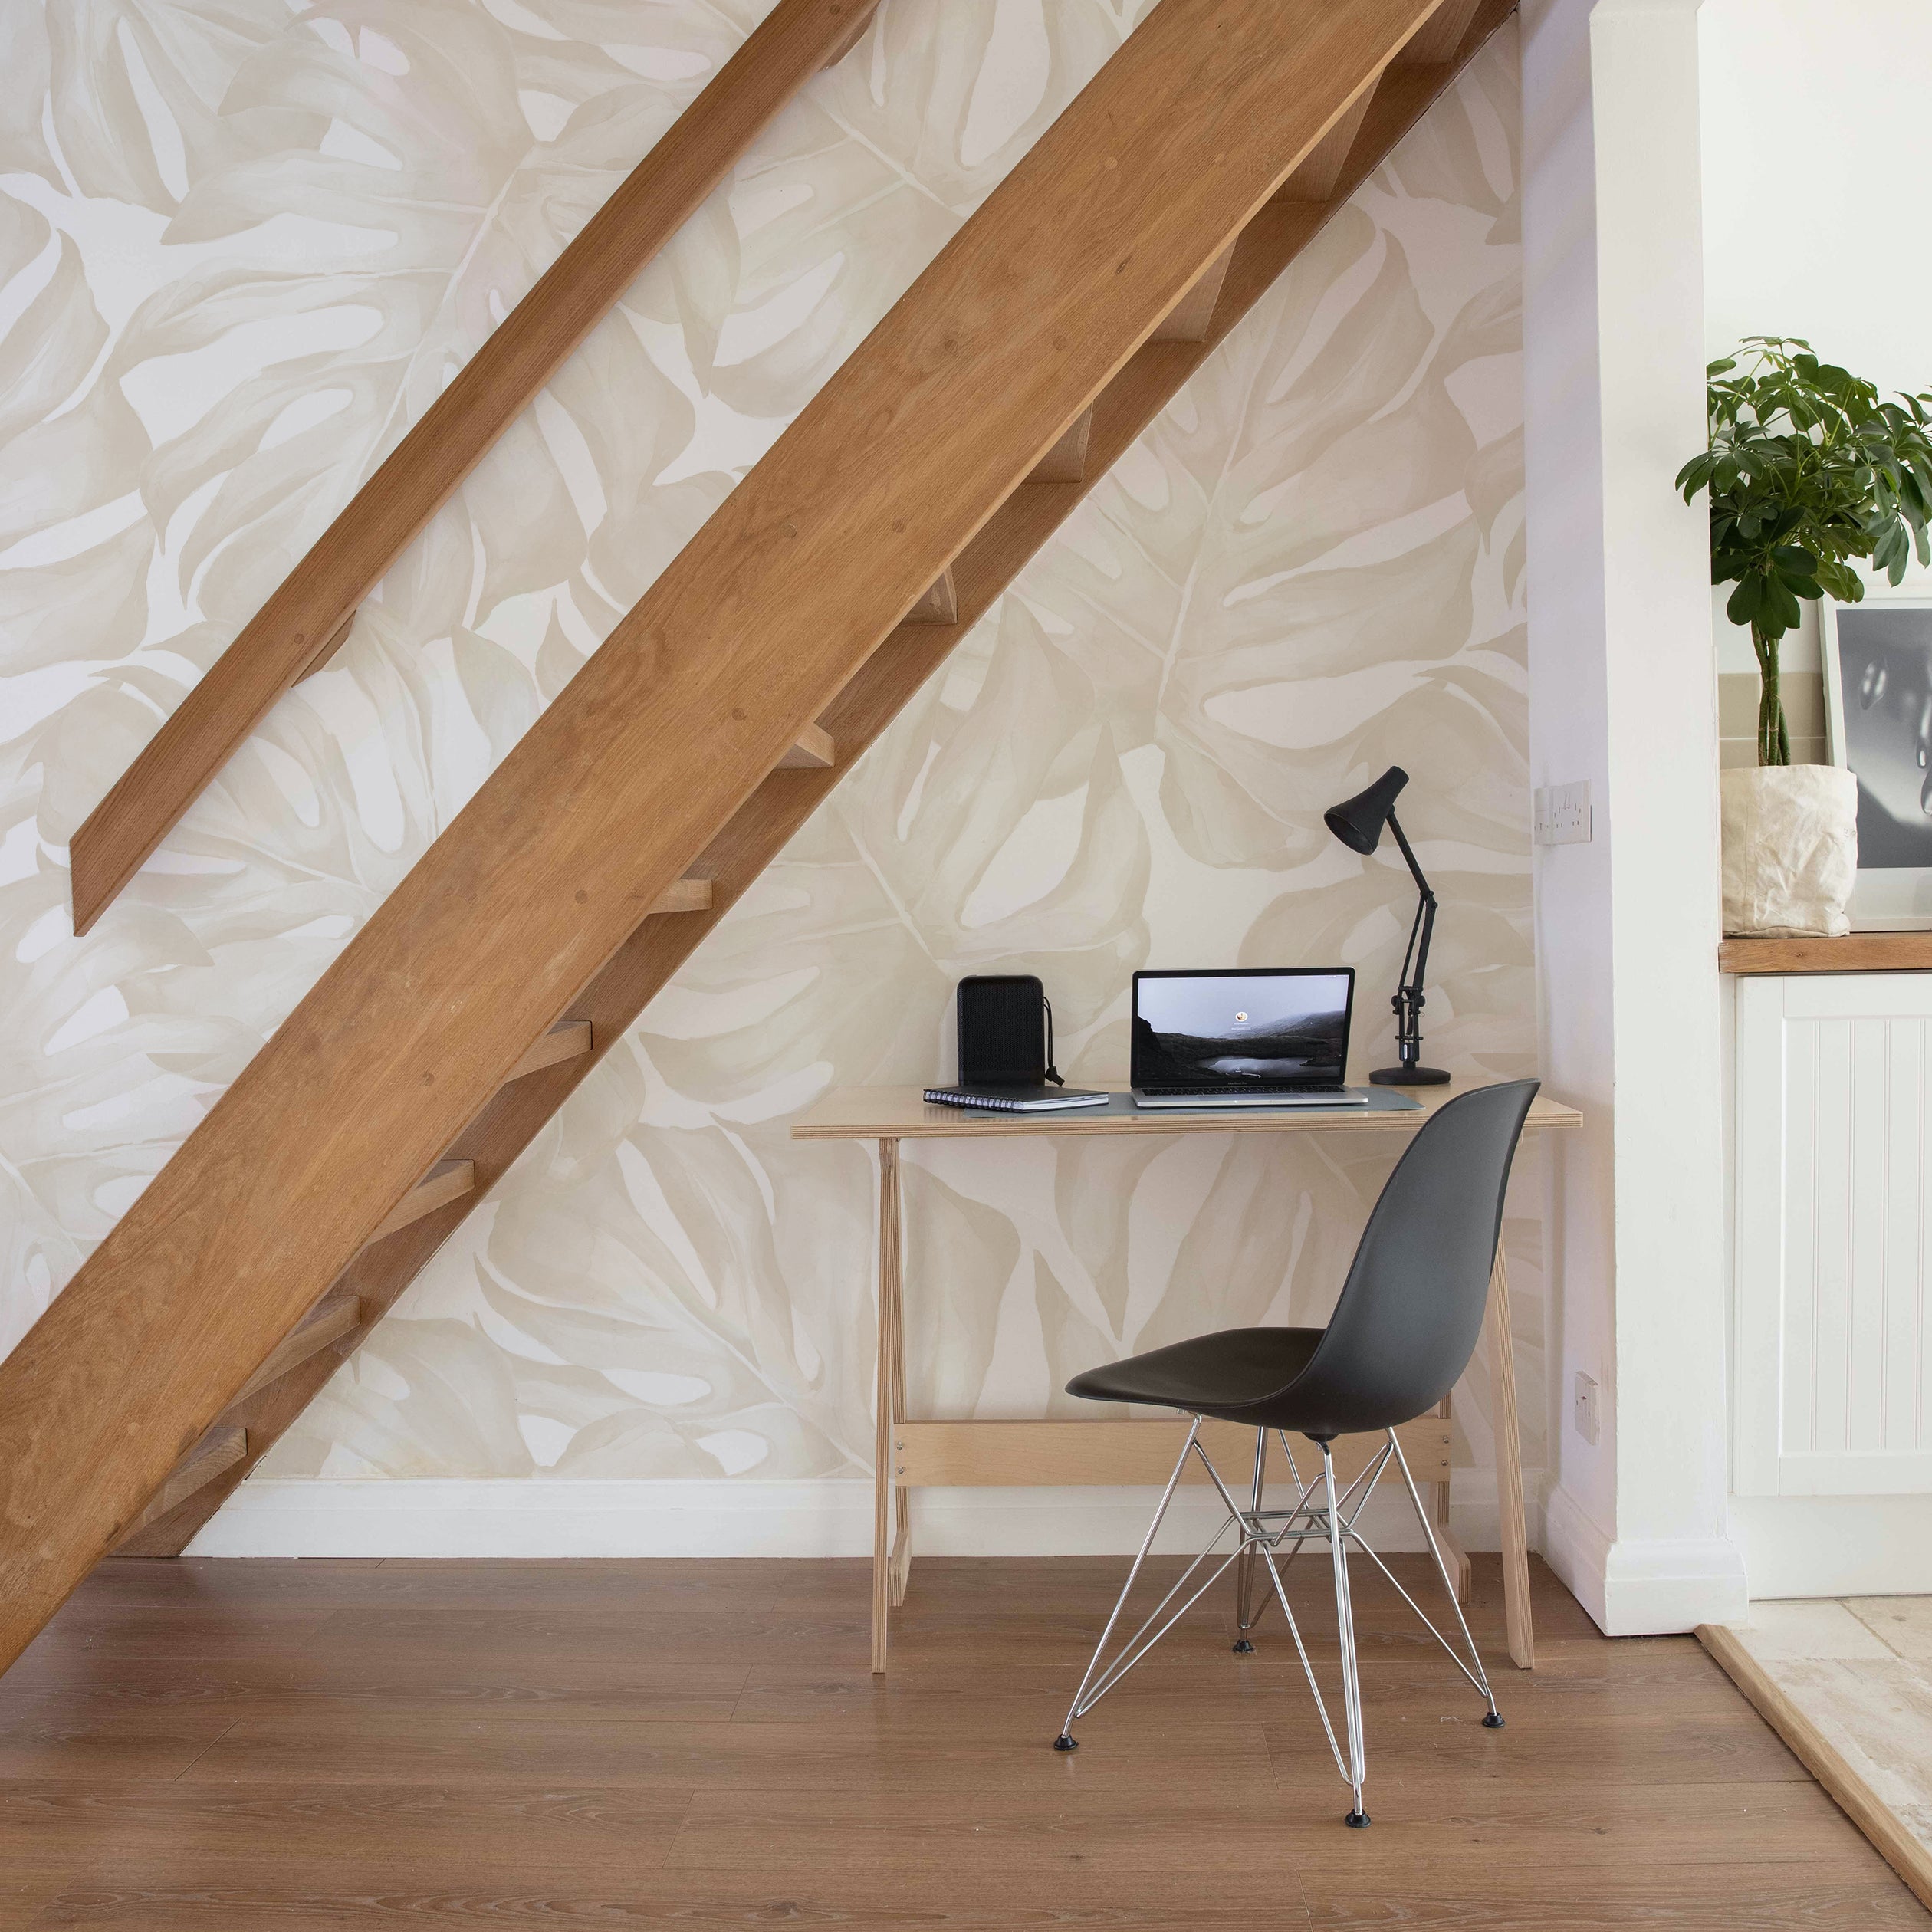 Interior view of a home office setup with Modern Oasis Wallpaper - Ecru. The wallpaper features a subtle, large-scale monstera leaf pattern in ecru tones, providing a calming and sophisticated atmosphere under a wooden staircase.